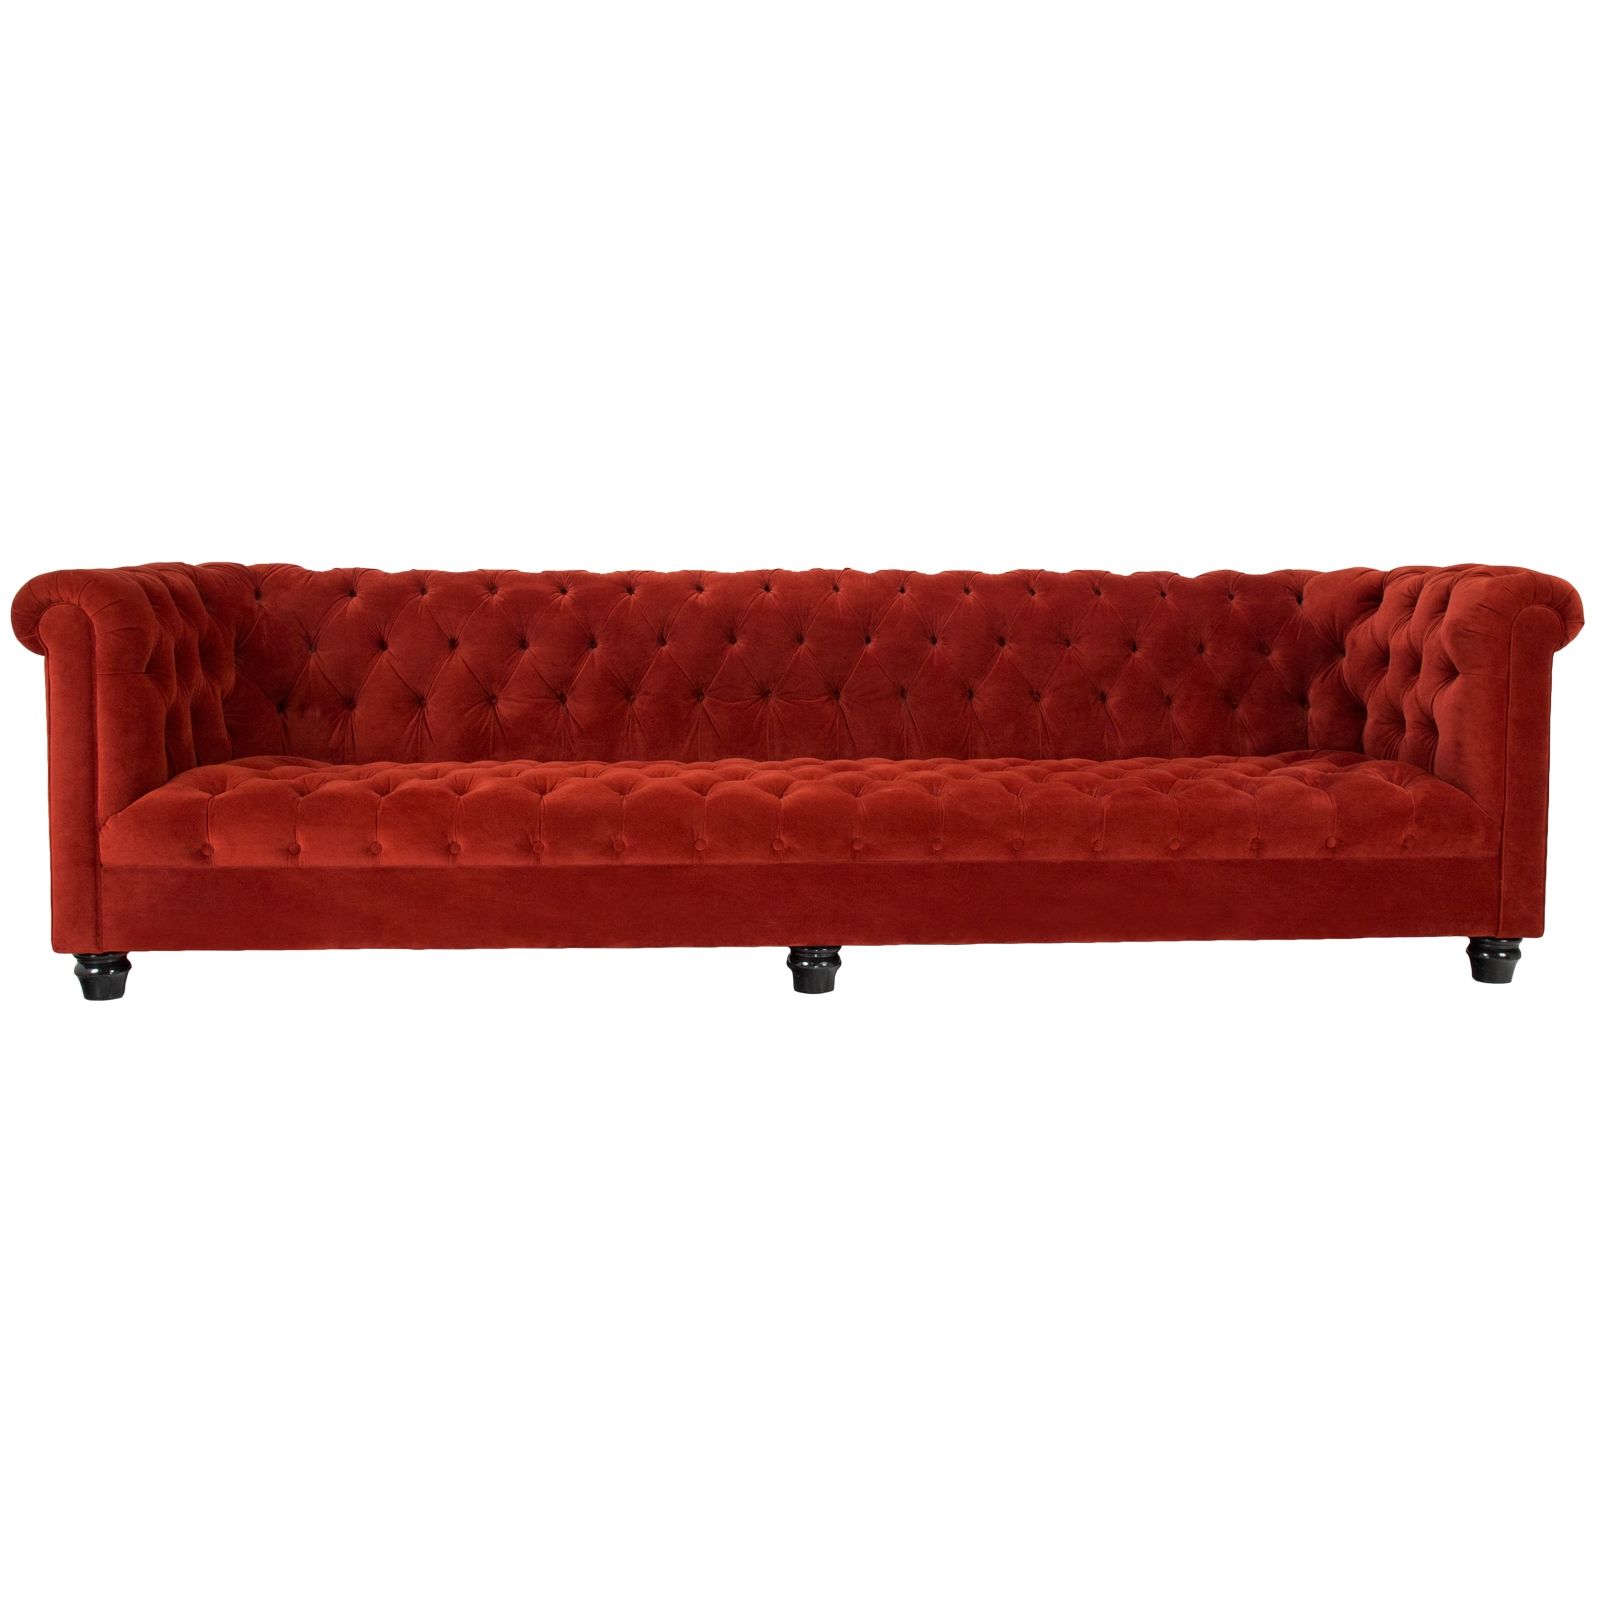 Tufted Sofa Rentals Event Furniture Rental Throughout Manchester Sofas (View 2 of 15)